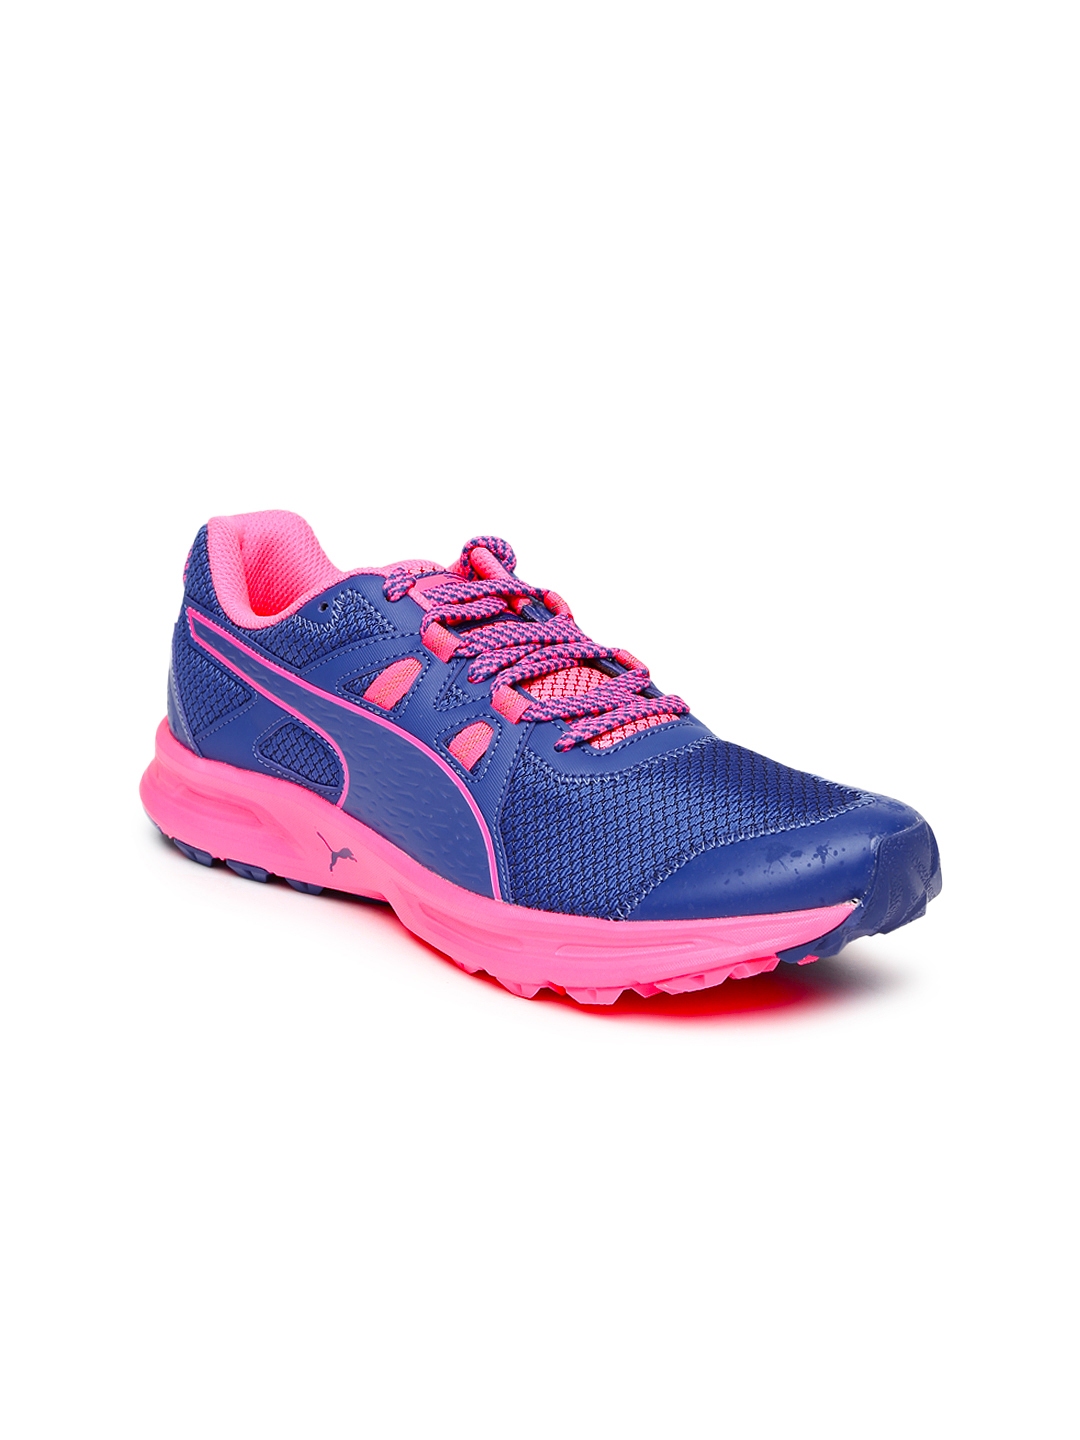 puma shoes pink and blue